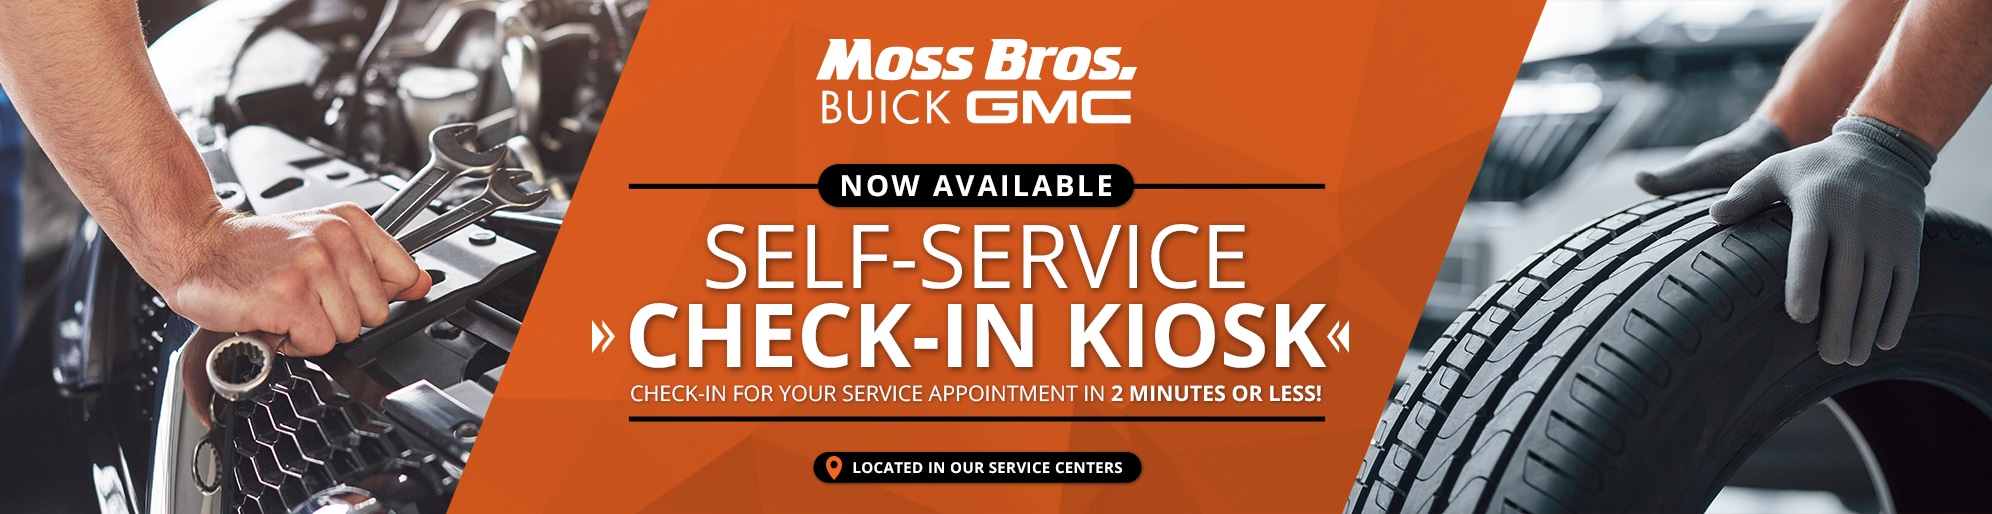 Moss Bros Buick GMC Self-Service Check-In Kiosk now available. Check-in for your service appointment in 2 minutes or less! Located in our service centers.